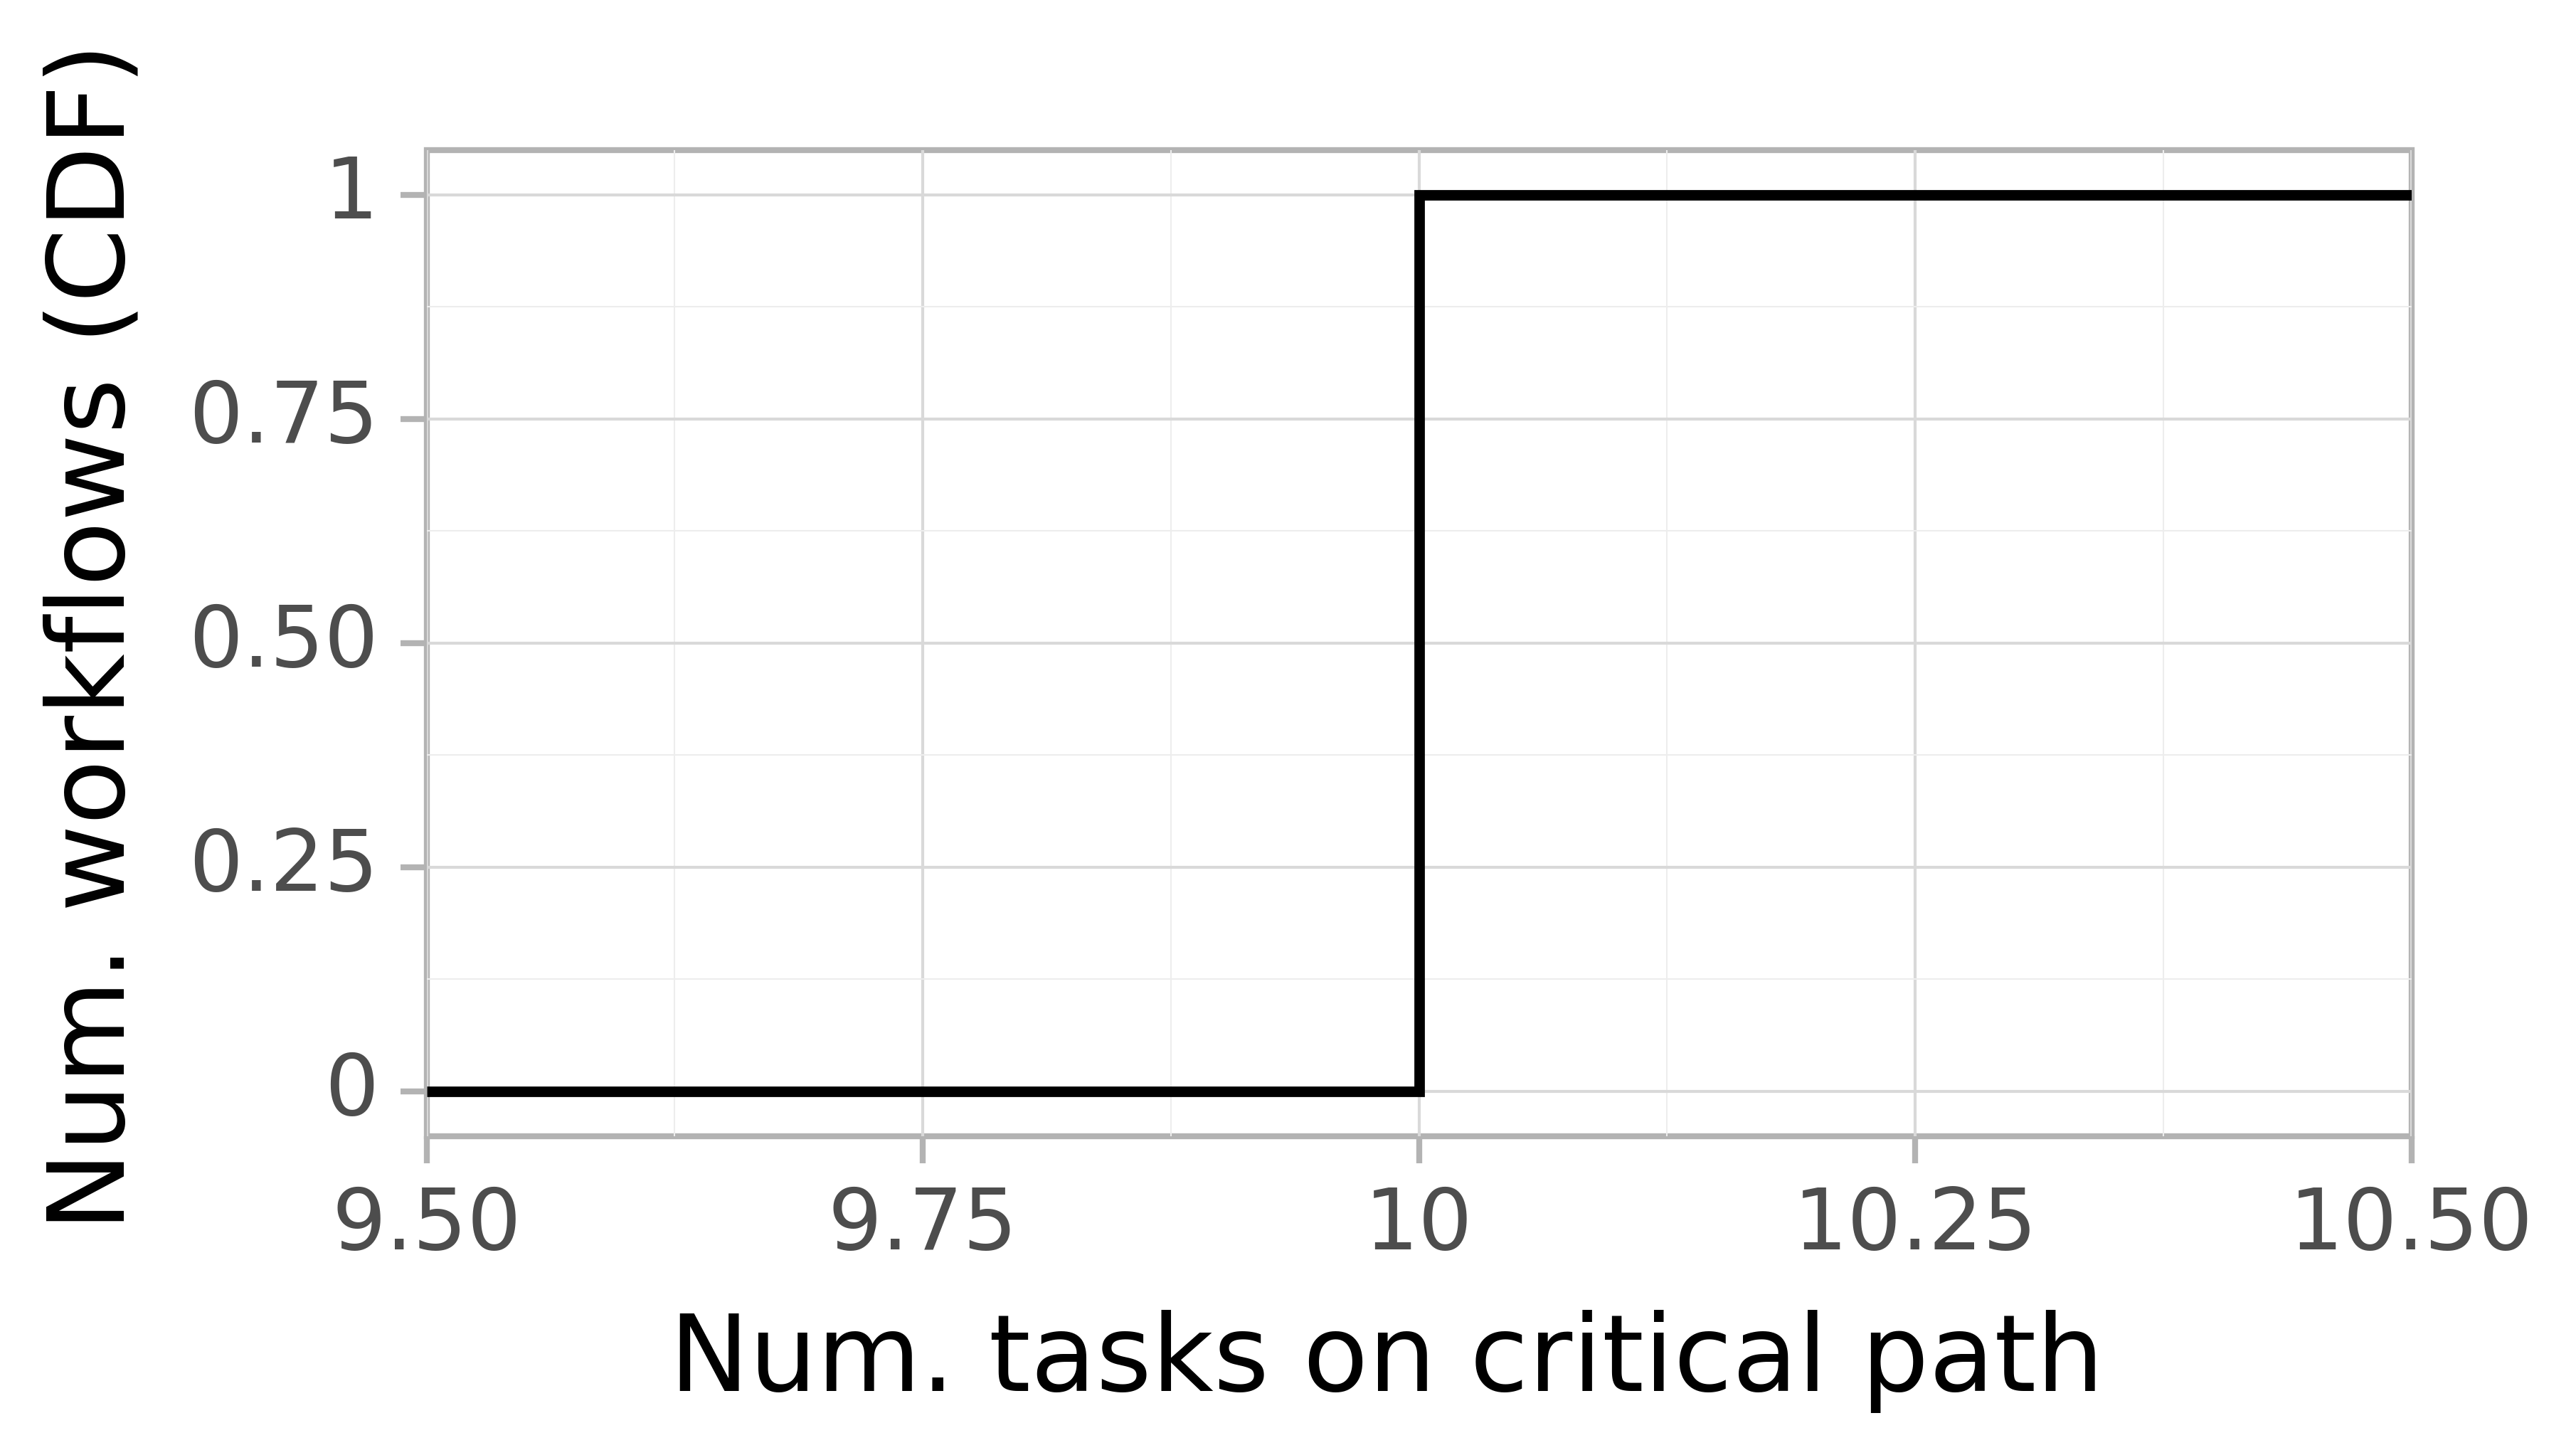 Job critical path task count graph for the Pegasus_P1 trace.